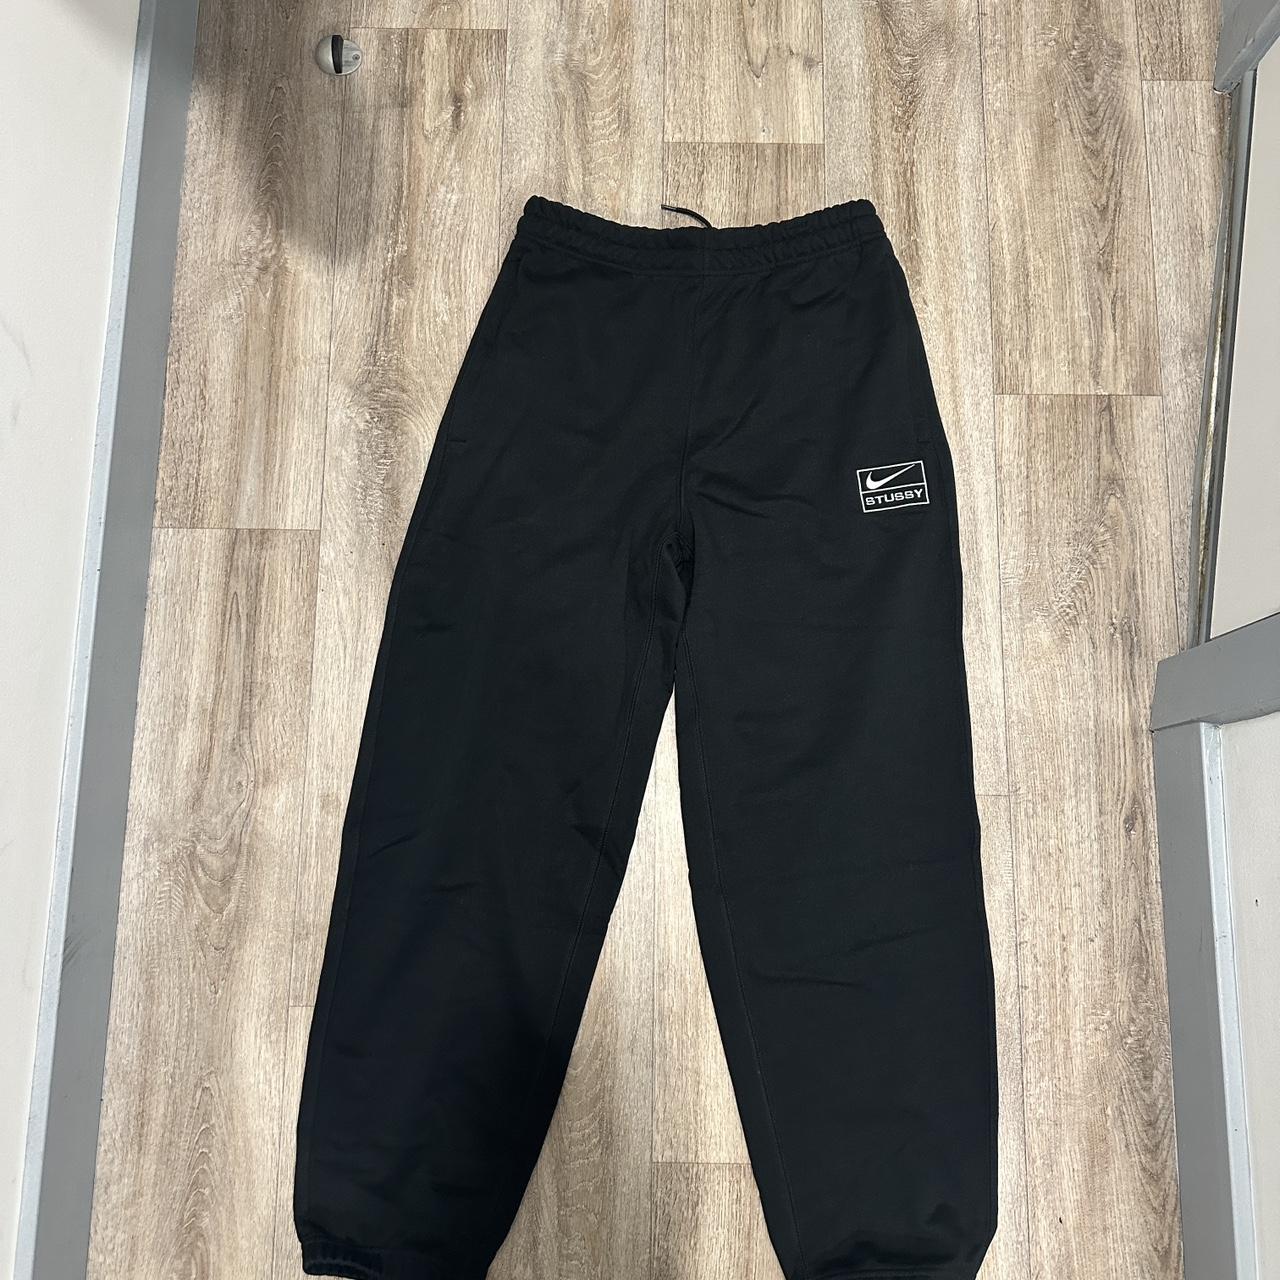 Nike stussy Joggers in Black Size small Open to... - Depop